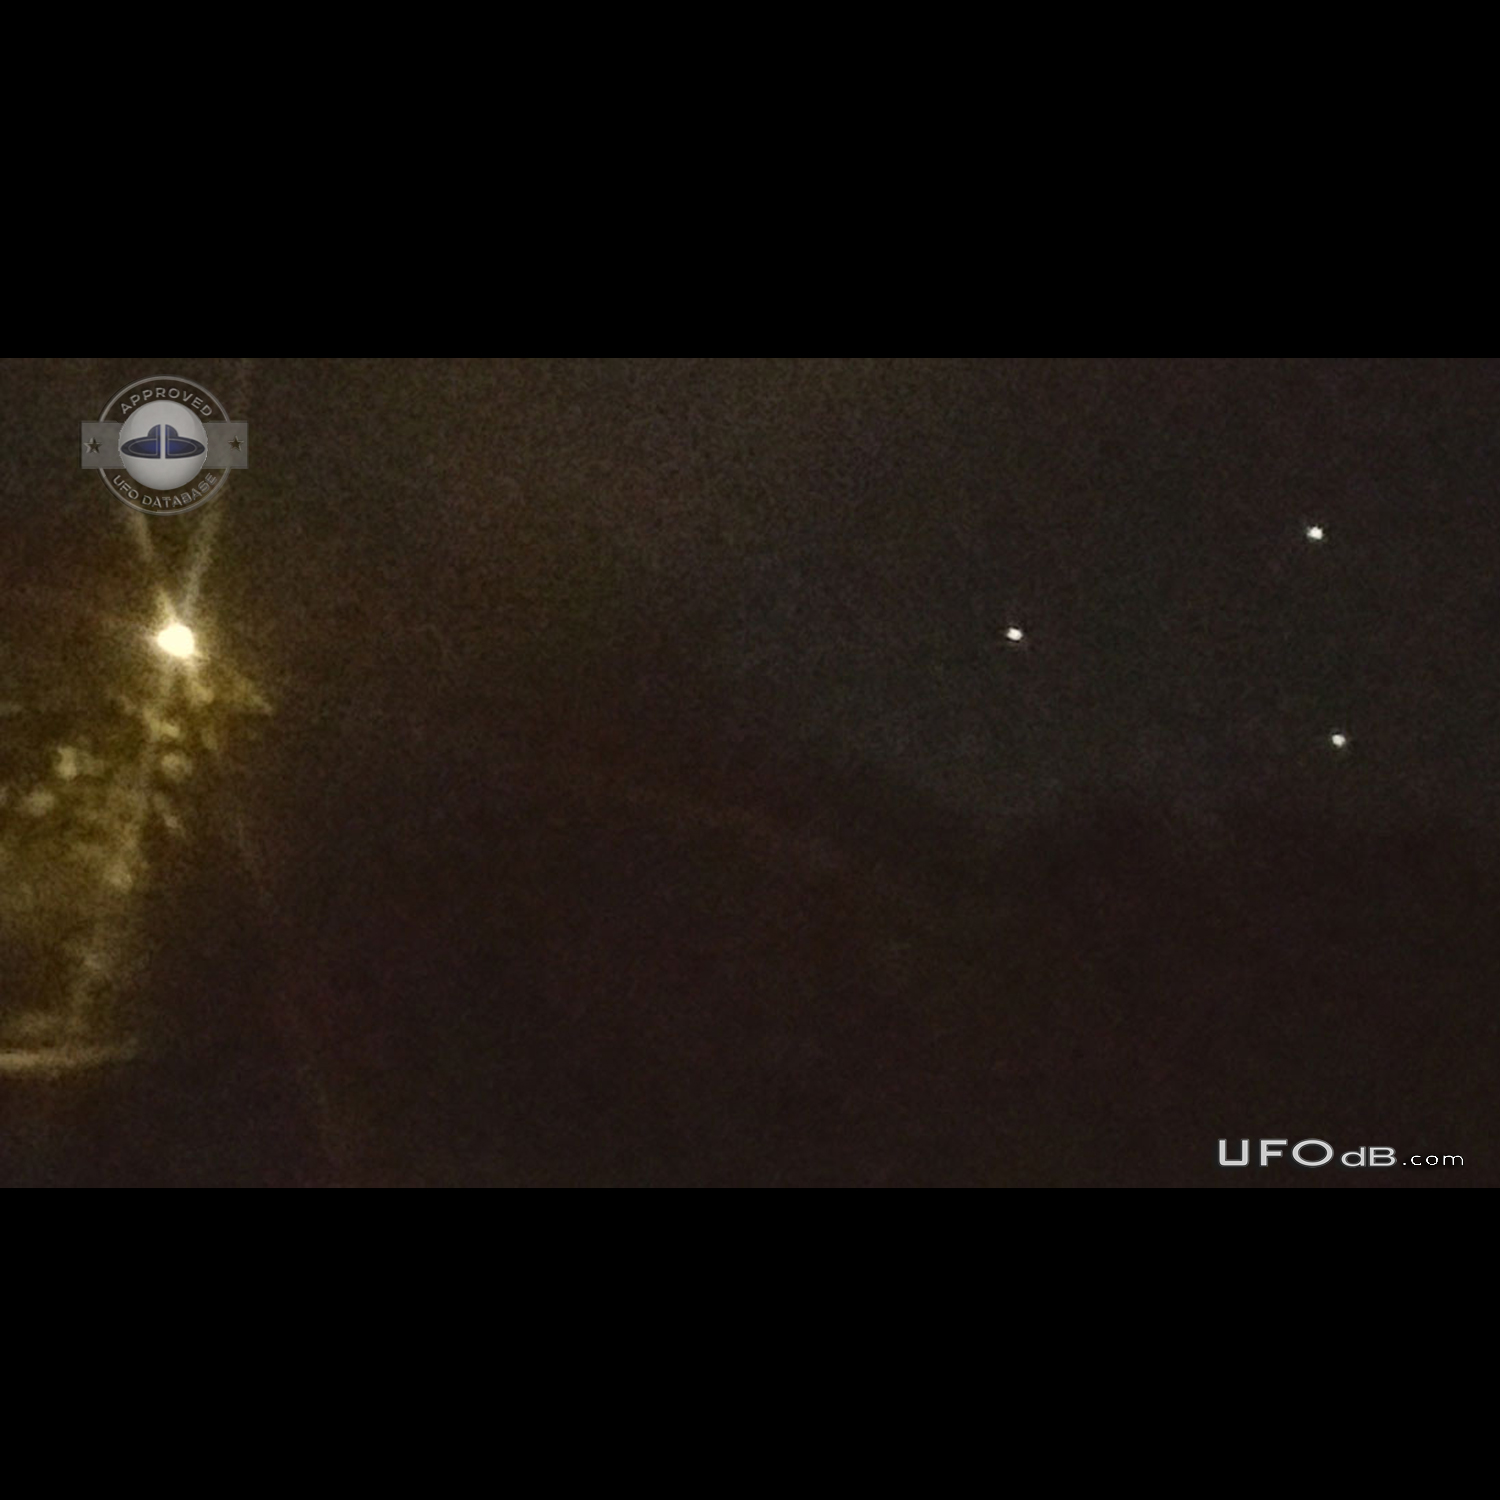 Me and coworker driving and saw the UFOs - Saint Cloud Florida USA 201 UFO Picture #780-6